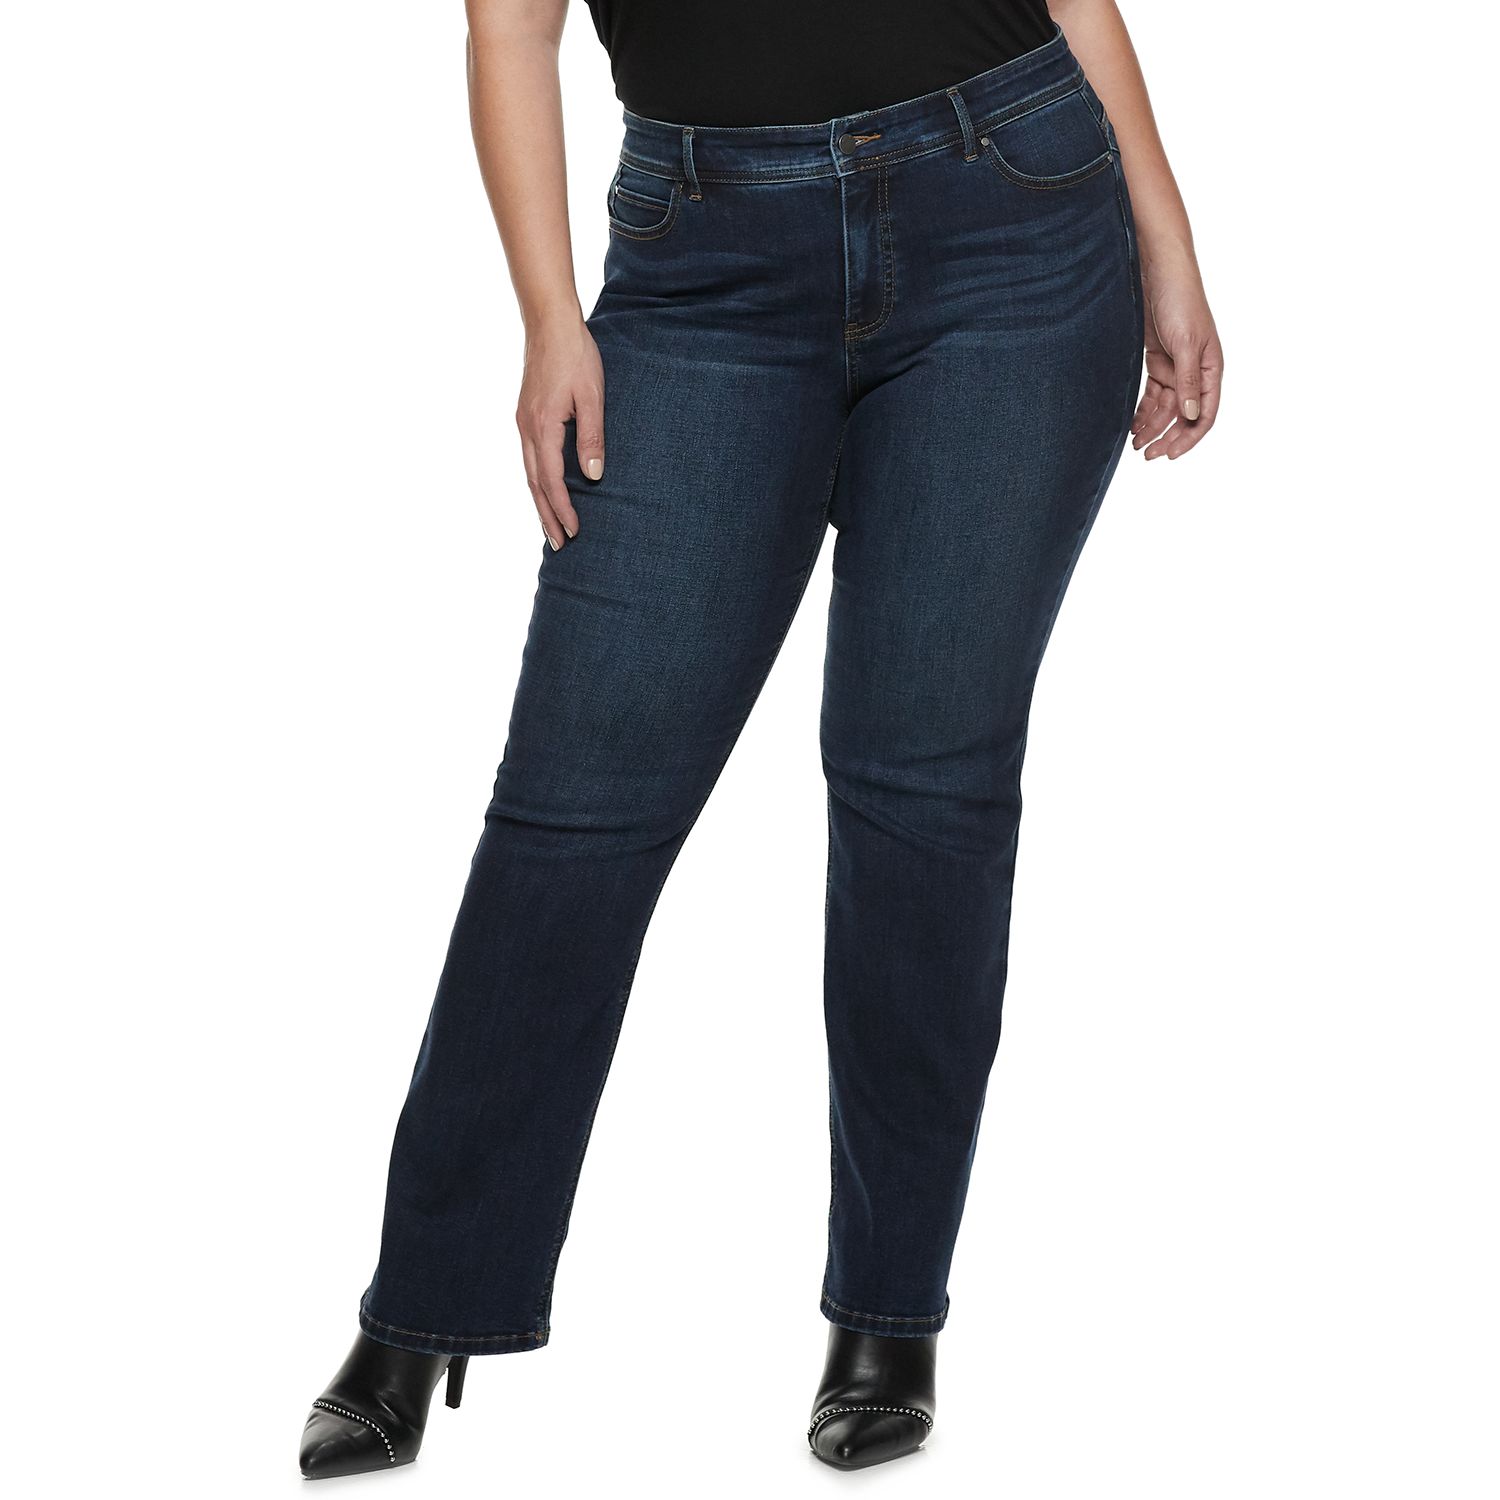 jeans with tummy control panel